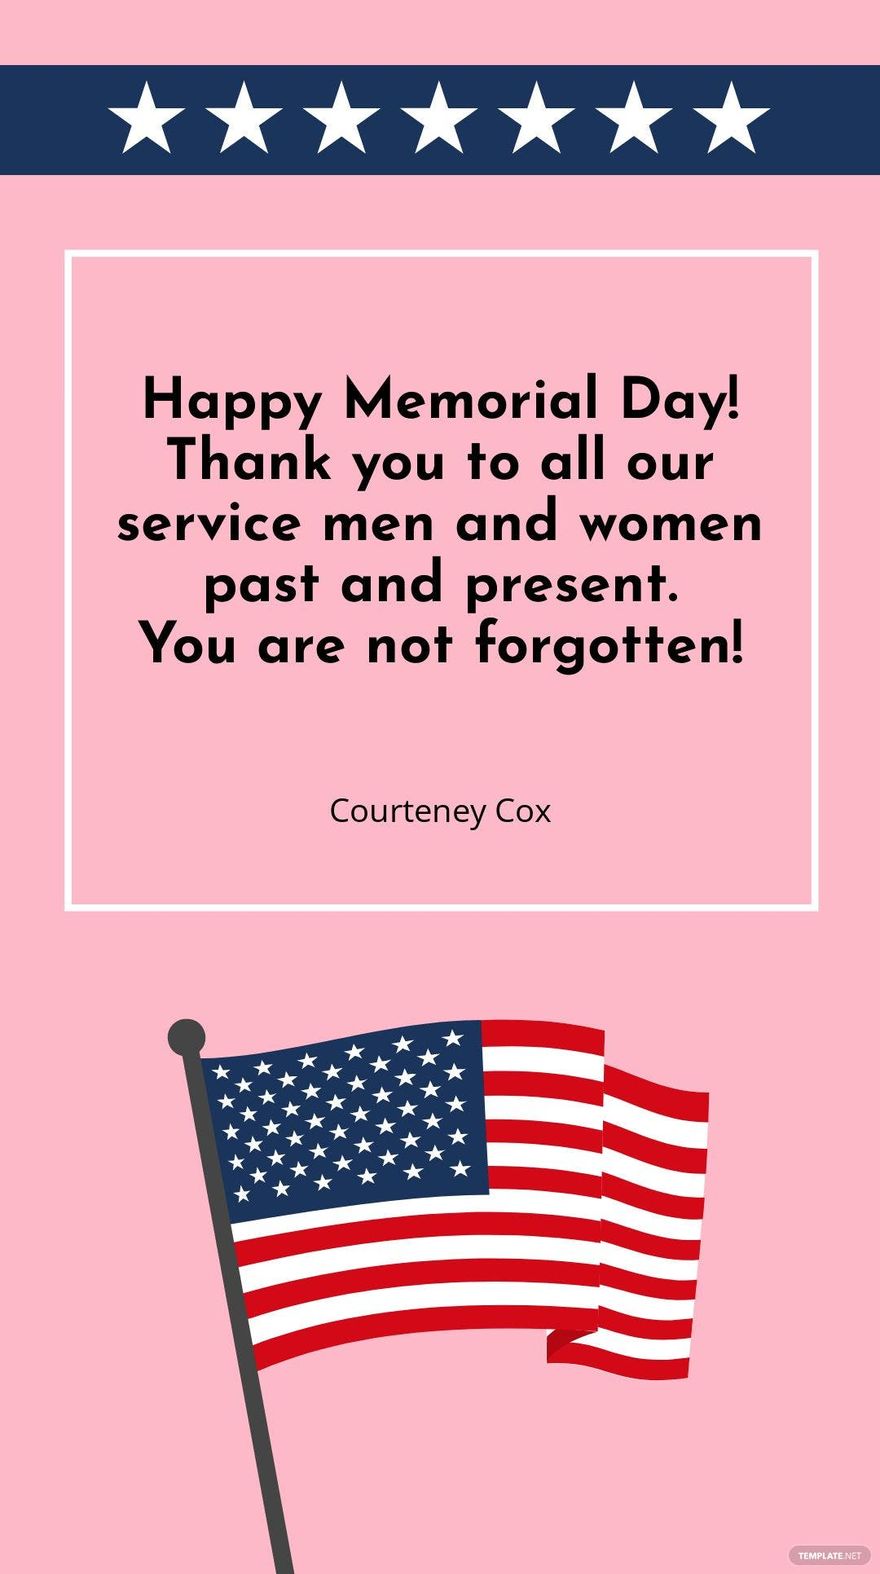 Free Courteney Cox - Happy Memorial Day! Thank you to all our service men and women past and present. You are not forgotten! in JPG